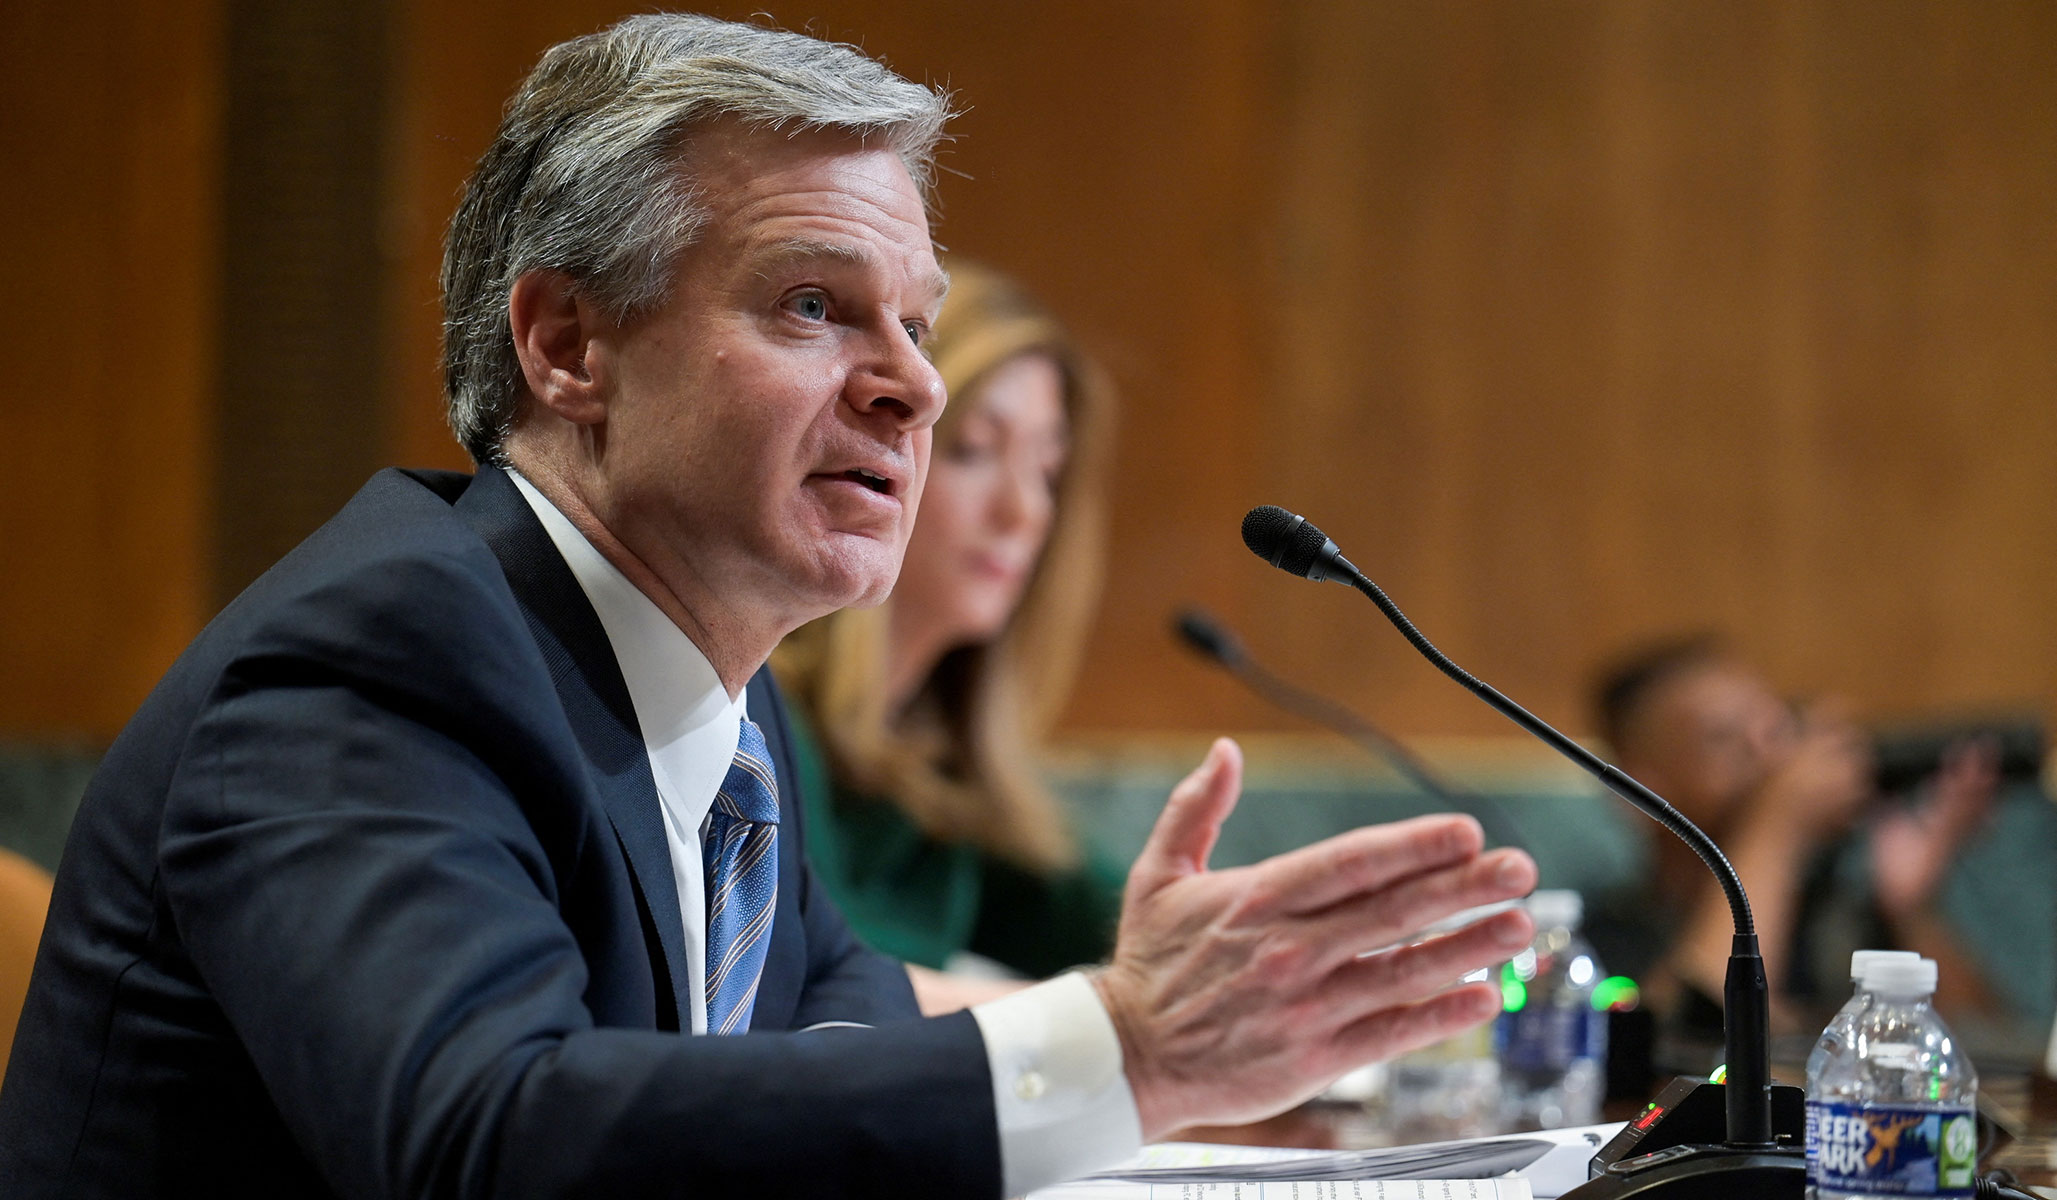 Wray Concedes Biden Bribery Document Exists But Continues Refusing to Produce It, Comer and Grassley Say